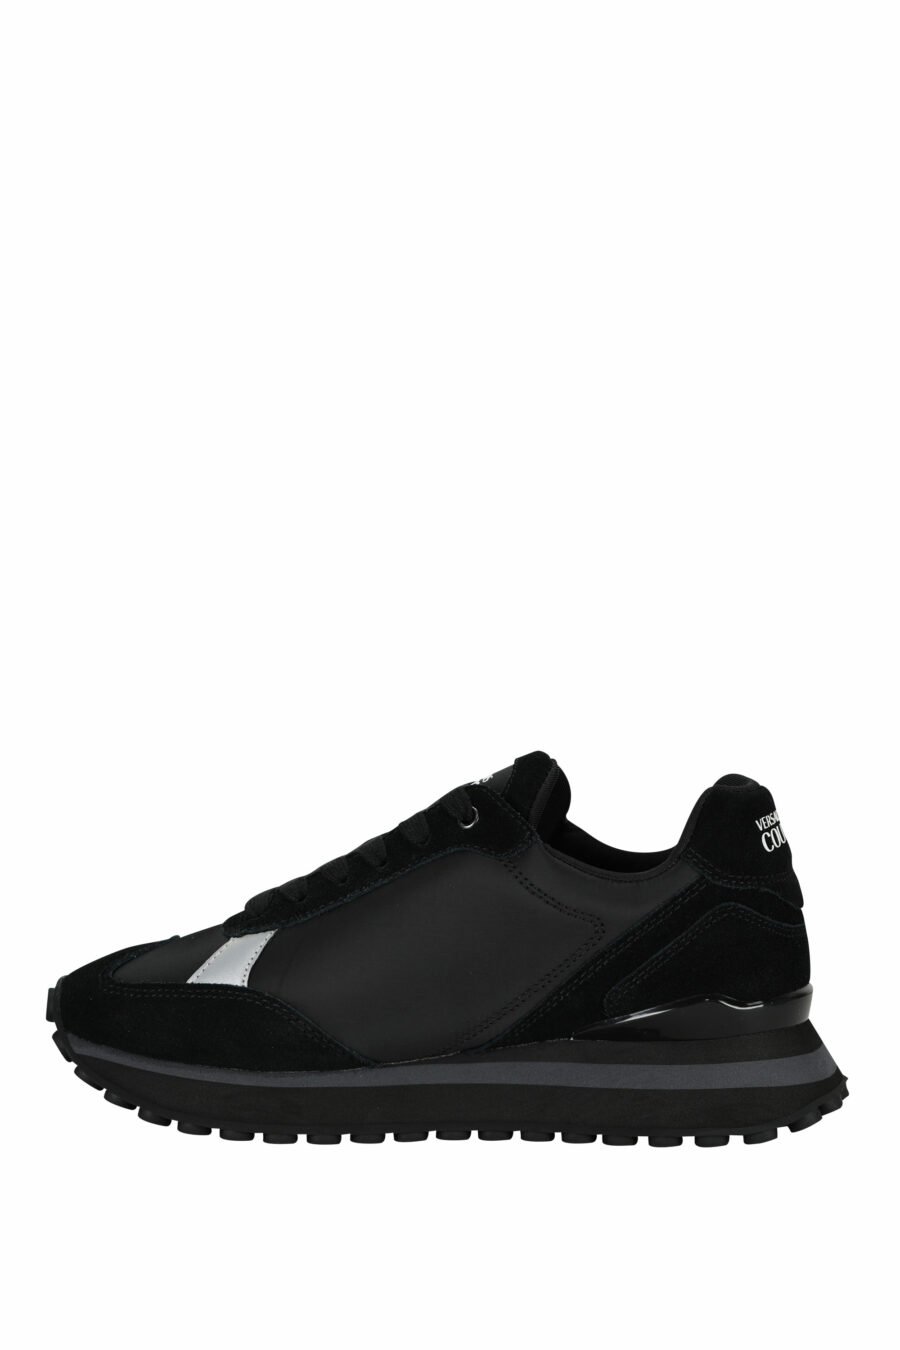 Black mix trainers with white mini-logo and black sole - 8052019606362 2